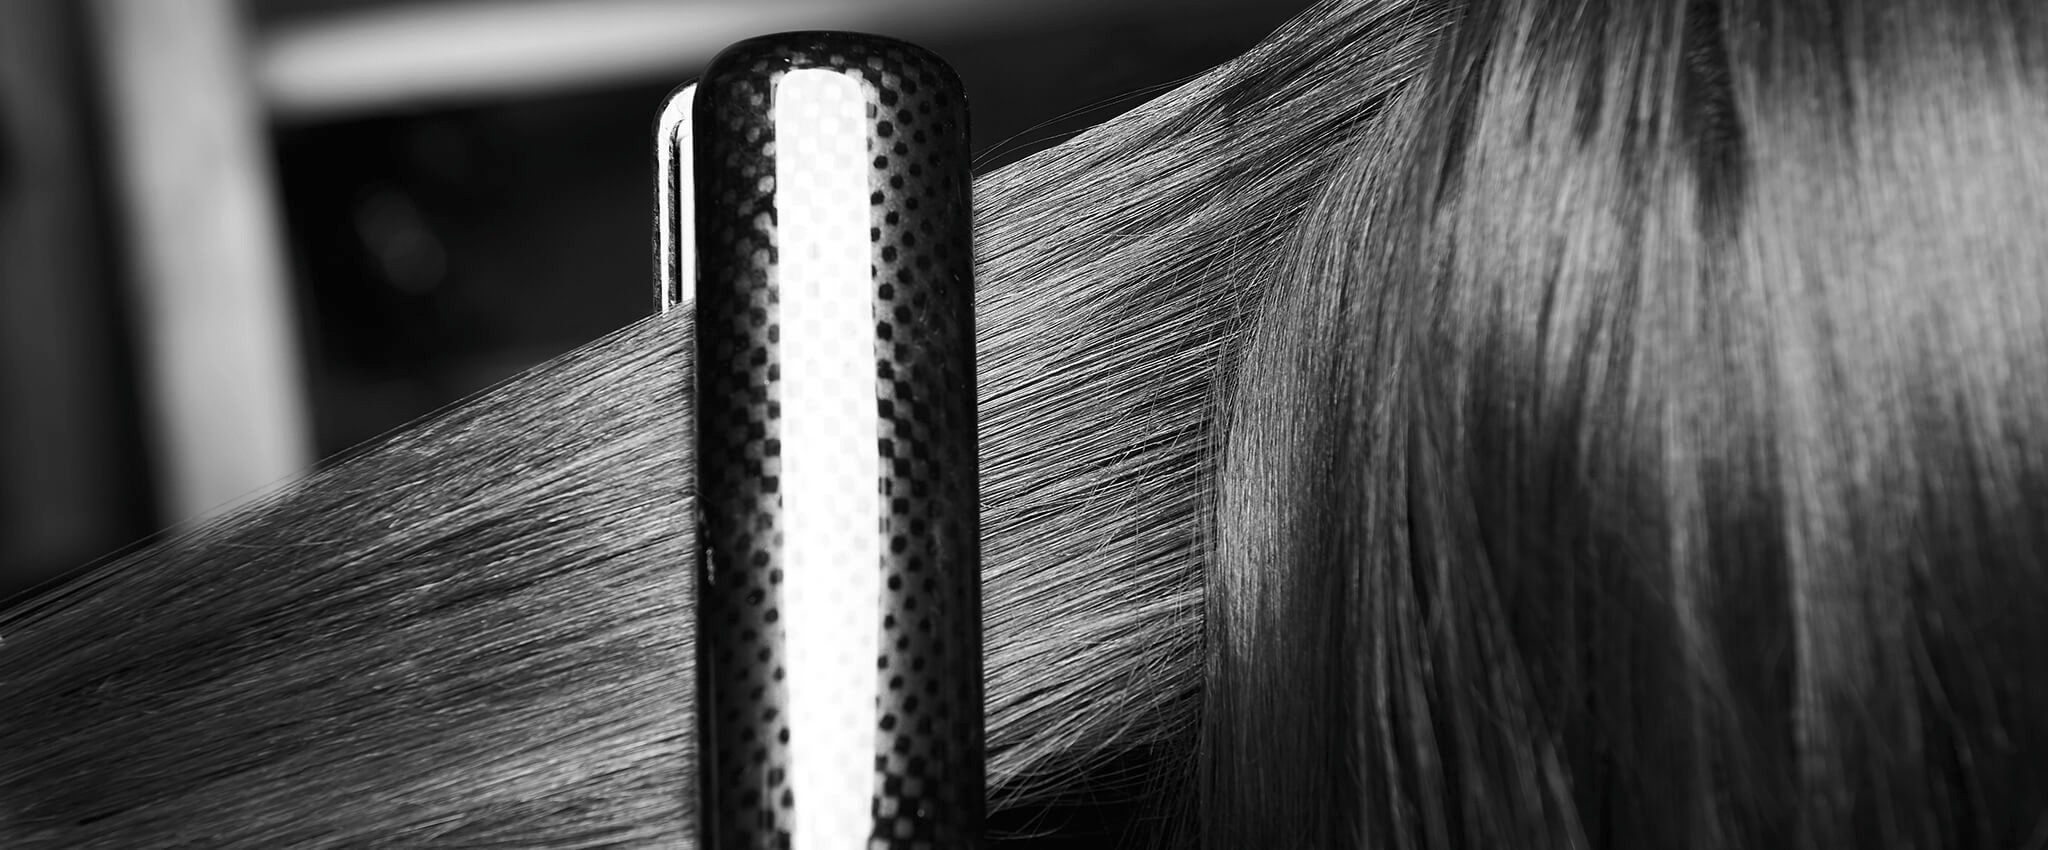 A section of long dark, damaged hair being styled with heat tongs.